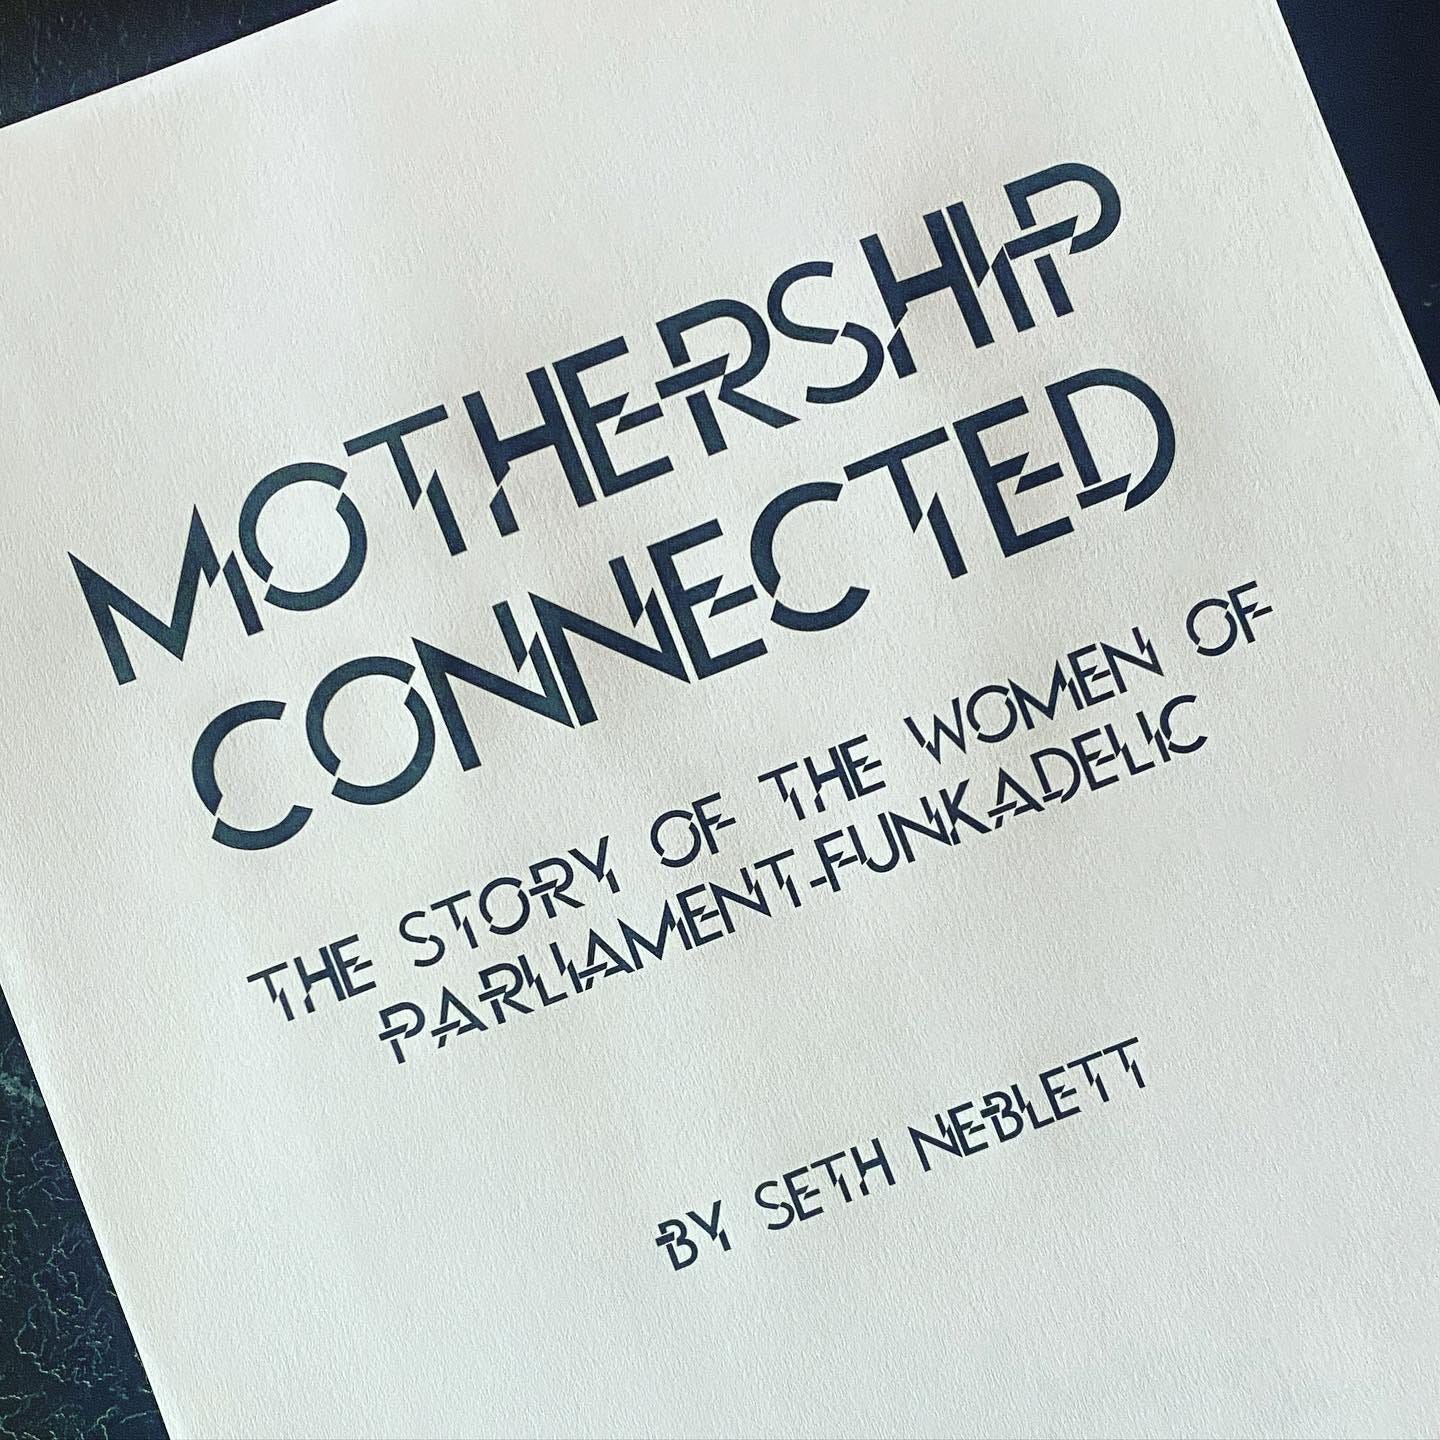 2024 forthcoming book, Mothership Connected: The Story of the Women of Parliament-Funkadelic, by Seth Neblett, on the University of Texas Press